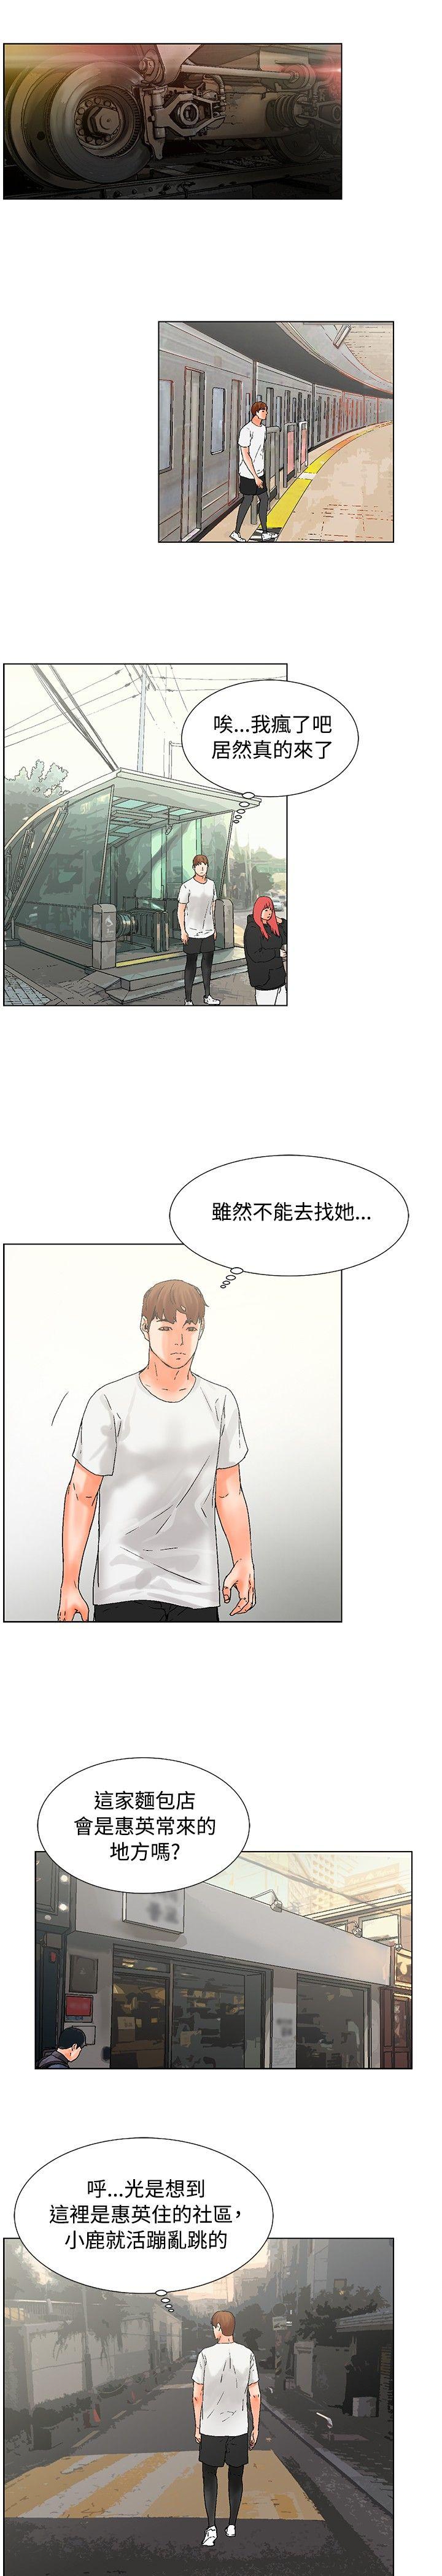 Audition 朋友的妻子：有妳在的家 Stripping - Page 11